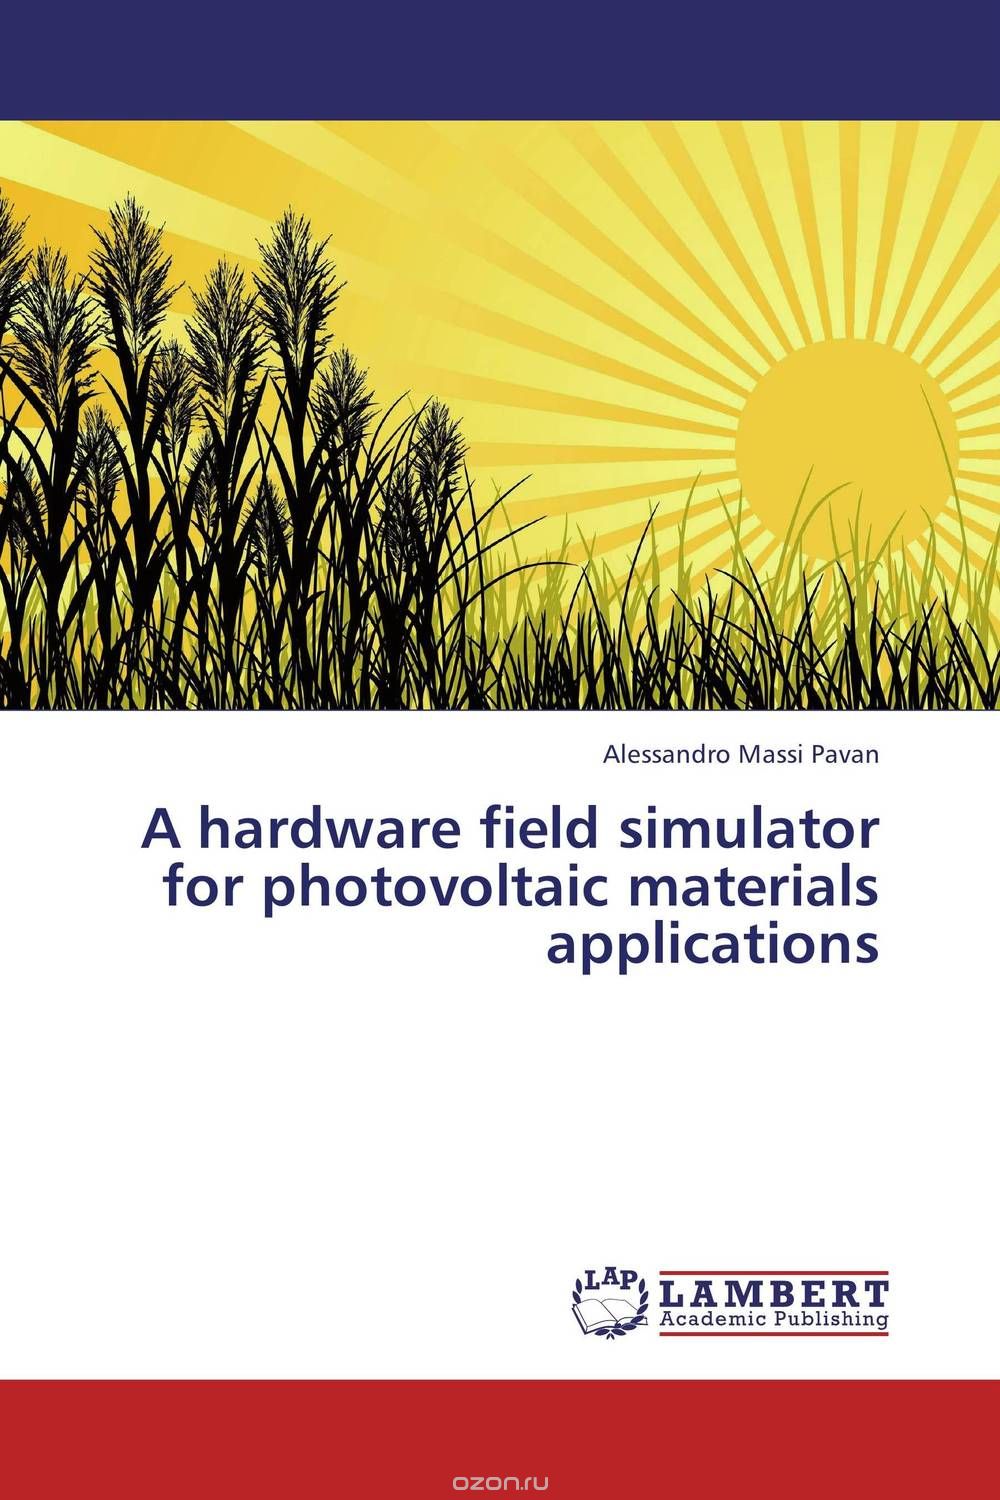 A hardware field simulator for photovoltaic materials applications